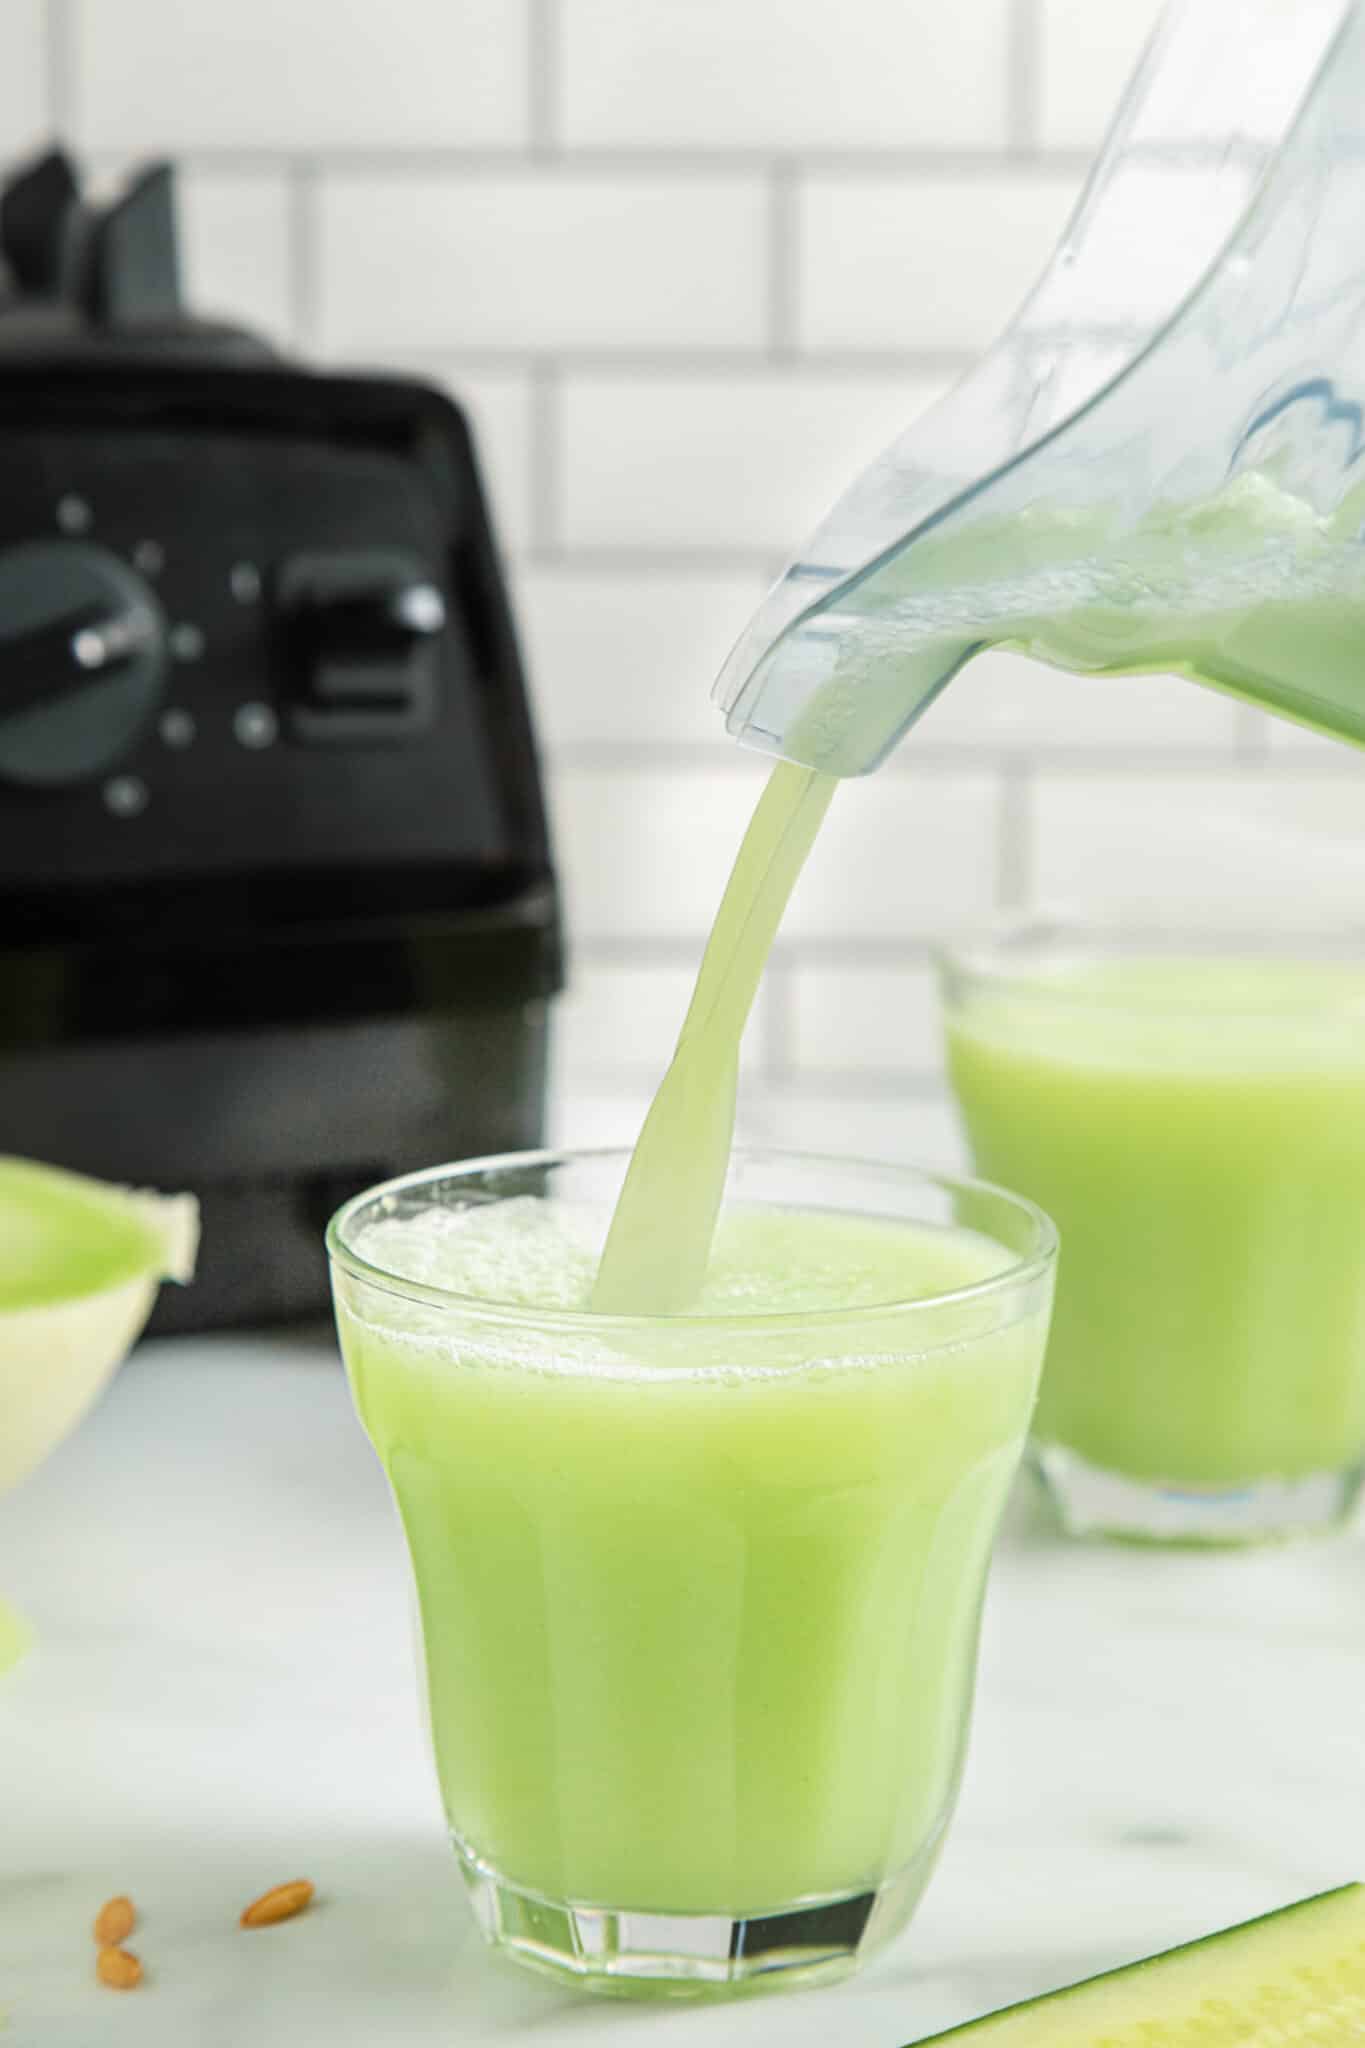 pouring honeydew smoothie into glass.